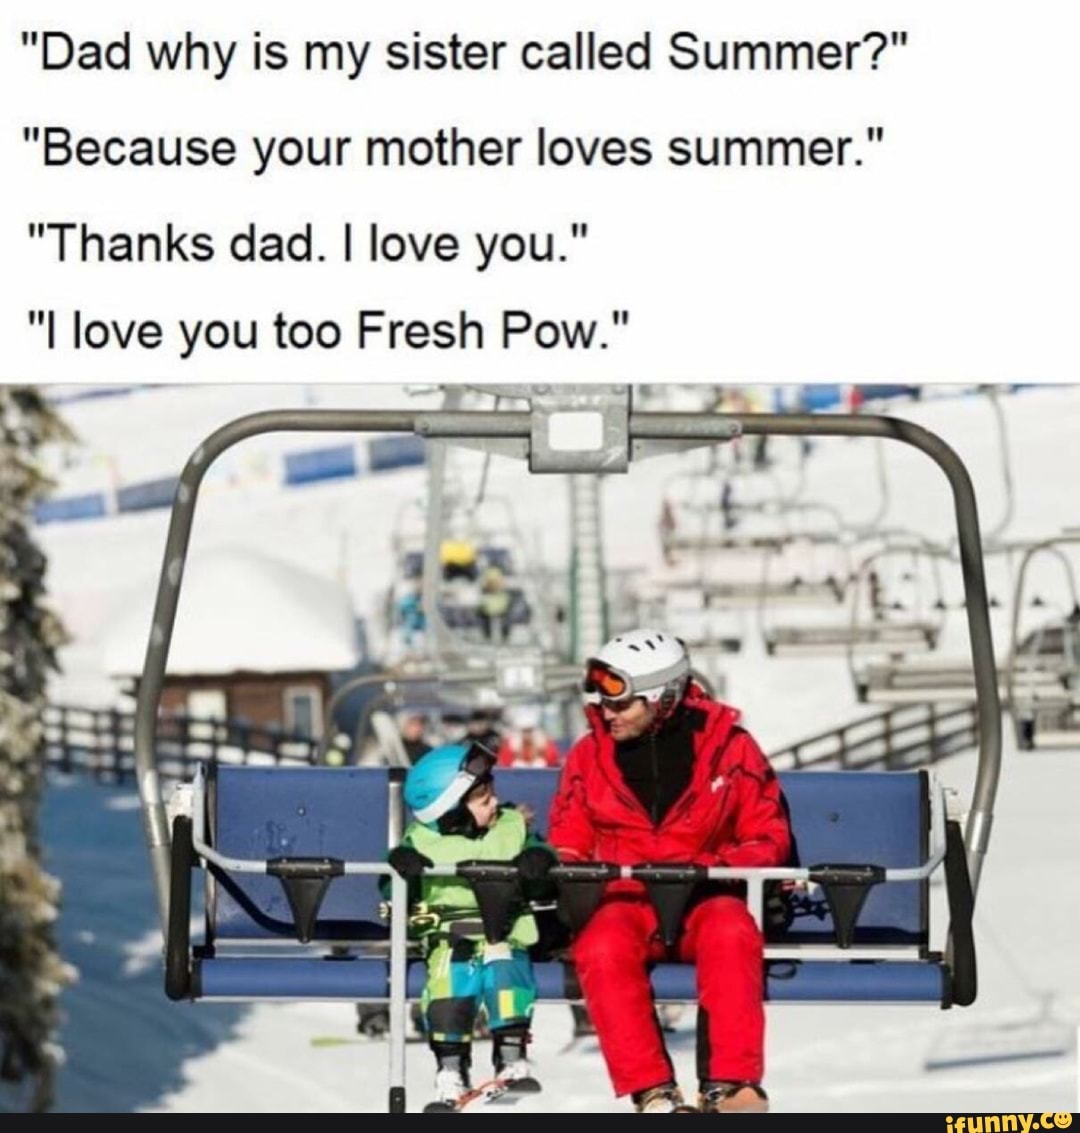 Dad why is my sister called Summer?" "Because your mother loves summer." "Thanks dad. I love you." "I love you too Fresh Pow." f R .., _.- - iFunny :)